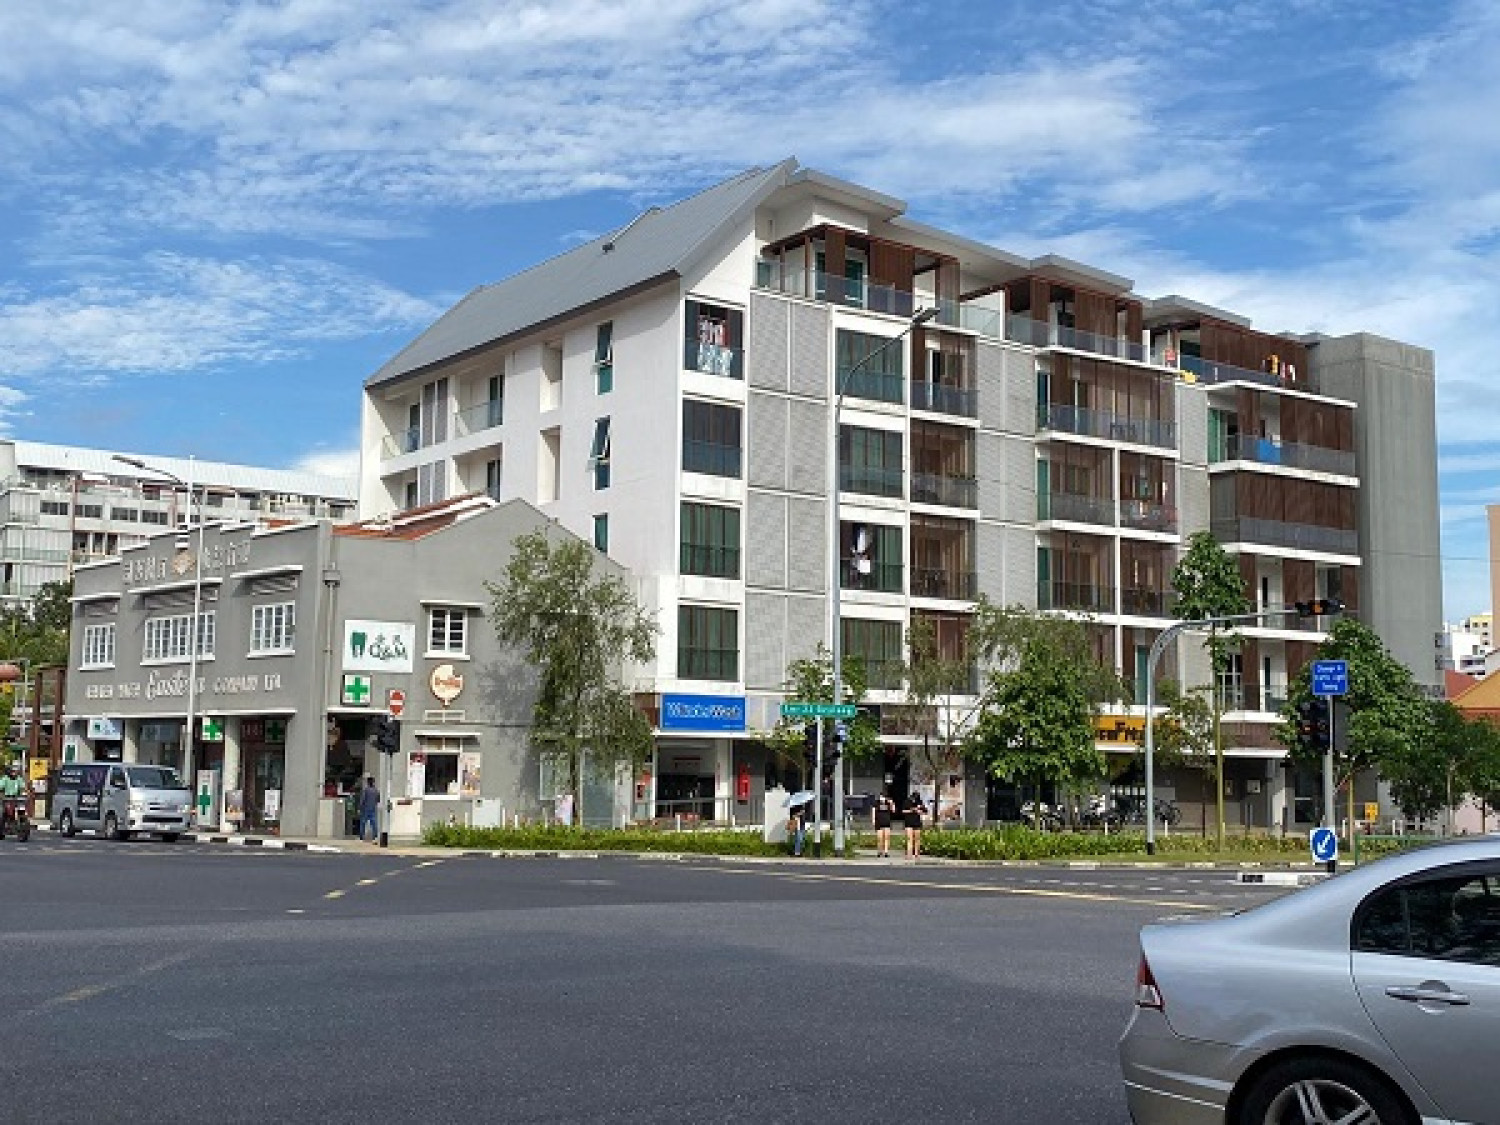 Freehold retail podium at Grandview Suites for sale at $26 mil - Property News